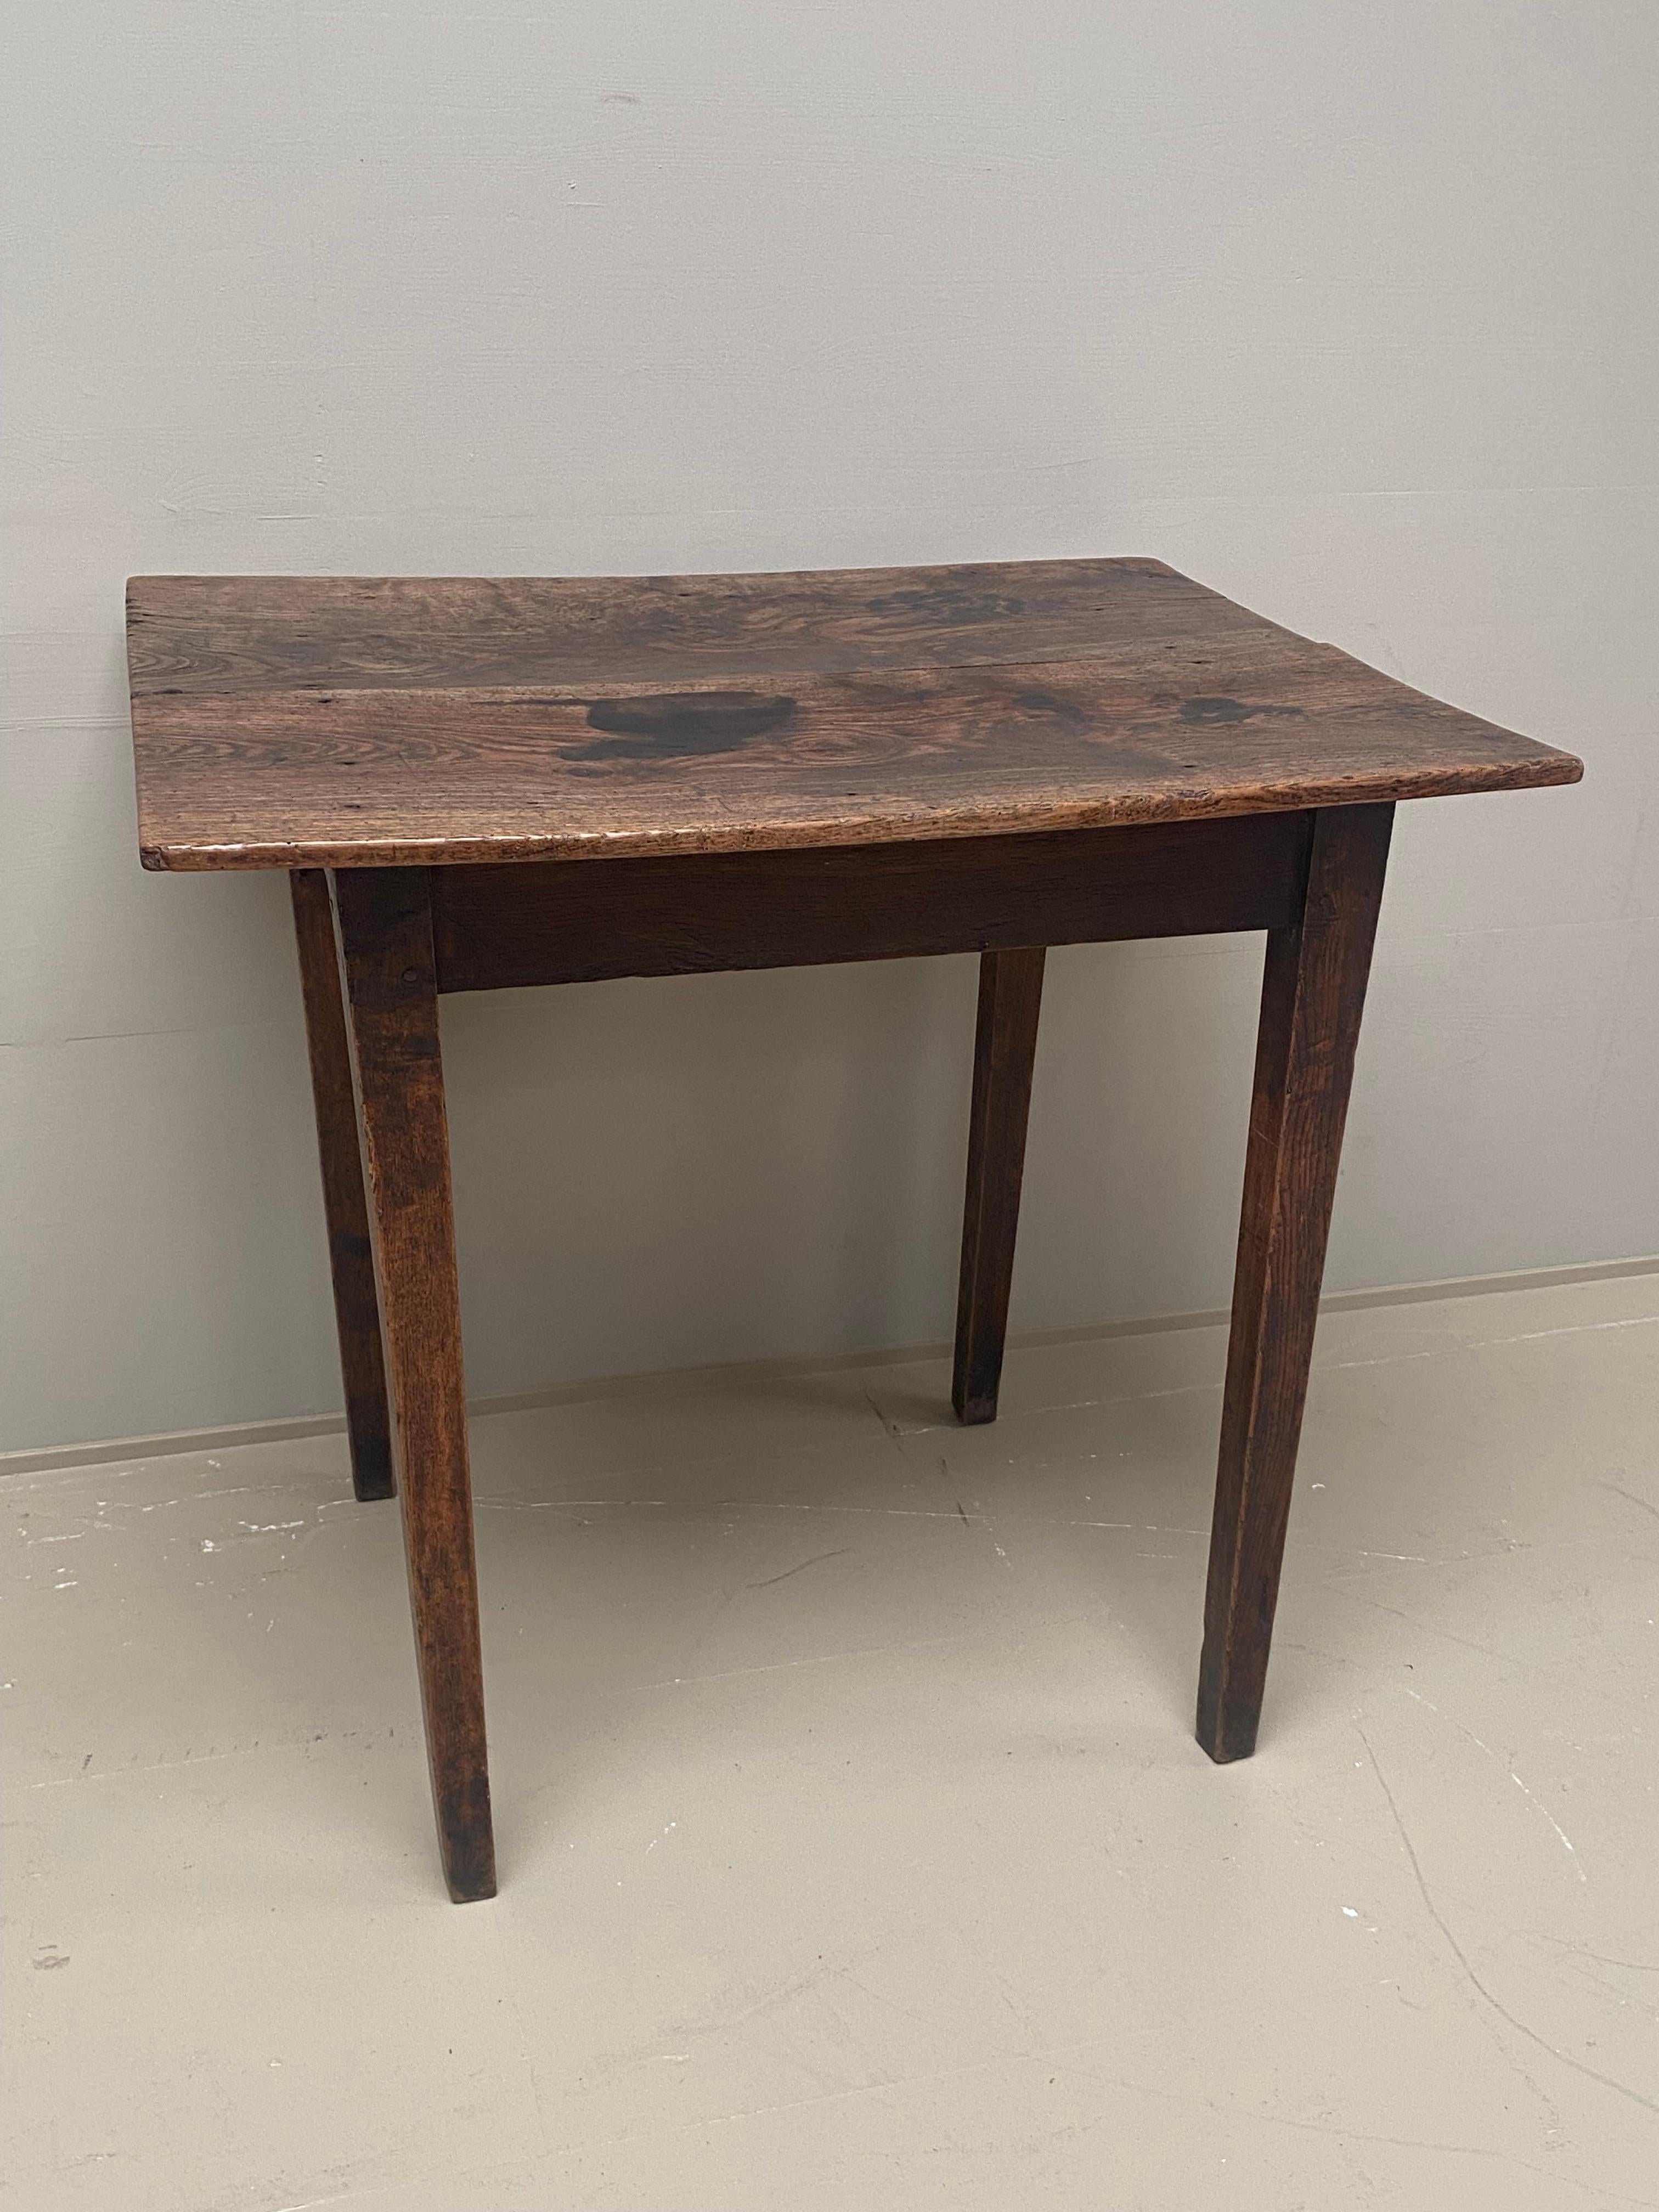 English Antique side table in elm and ash wood,
18th century, ca 1780,
Elegant centre or side table with warm and worn finish,
beautiful table by its simplicity.